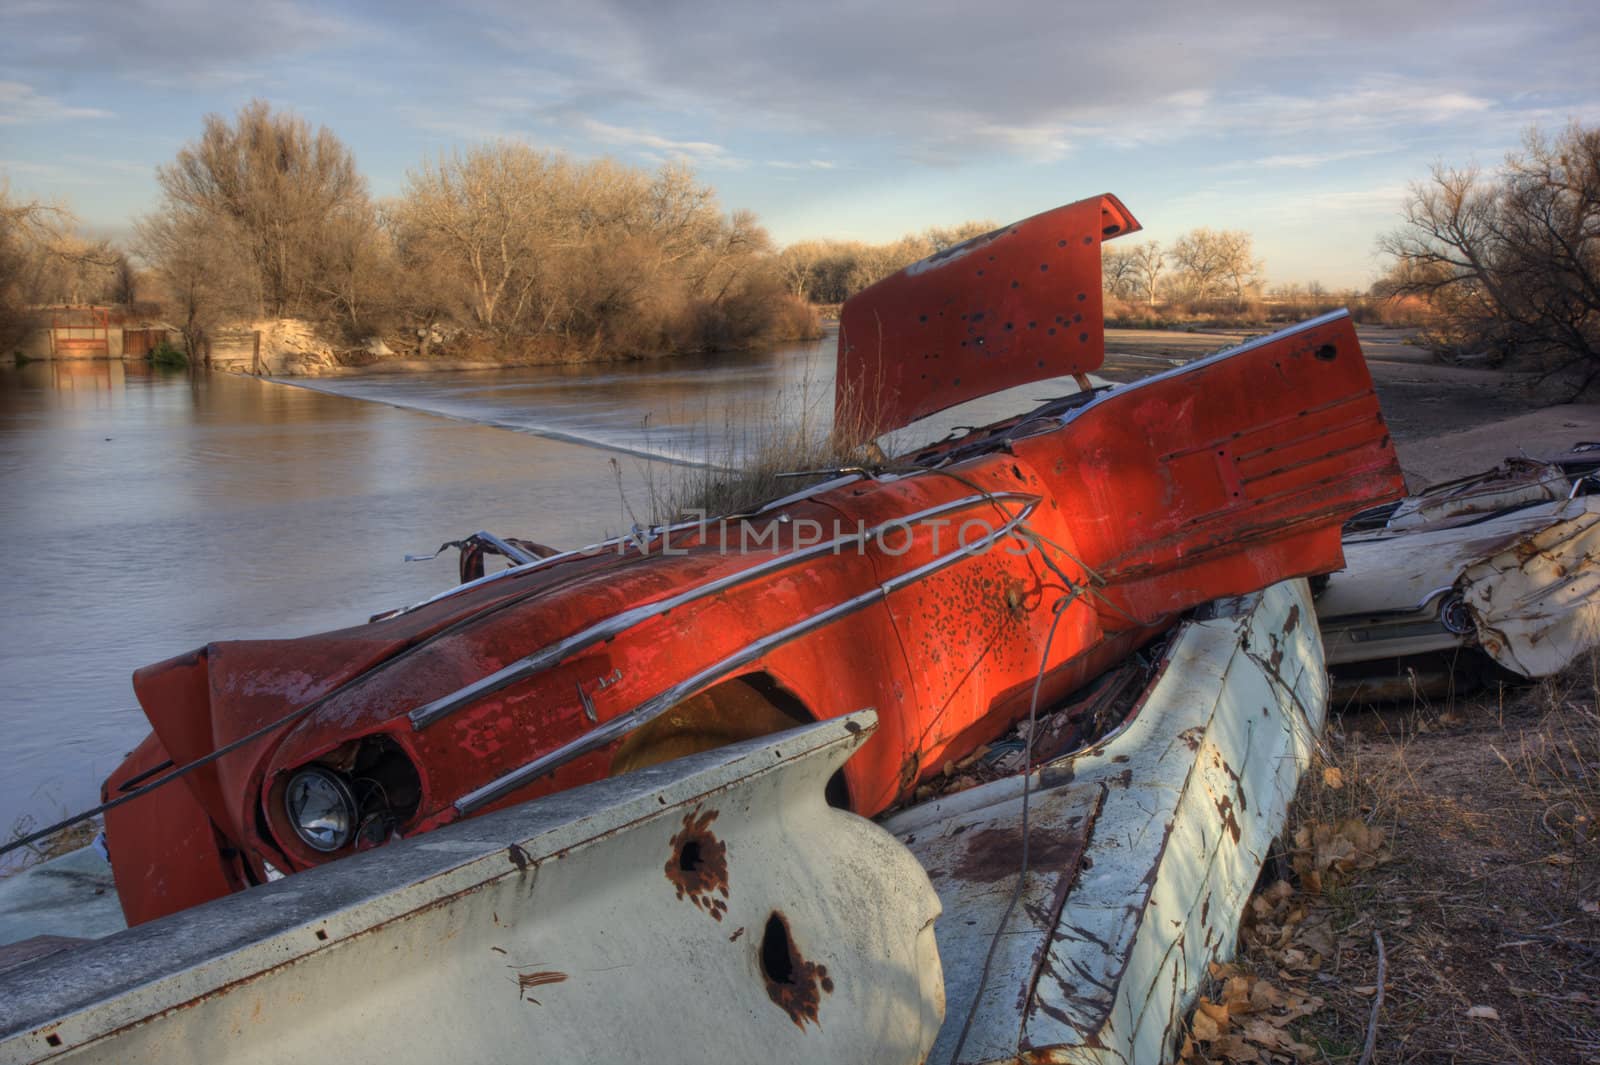 river irrigation dam and junk cars on a shore by PixelsAway